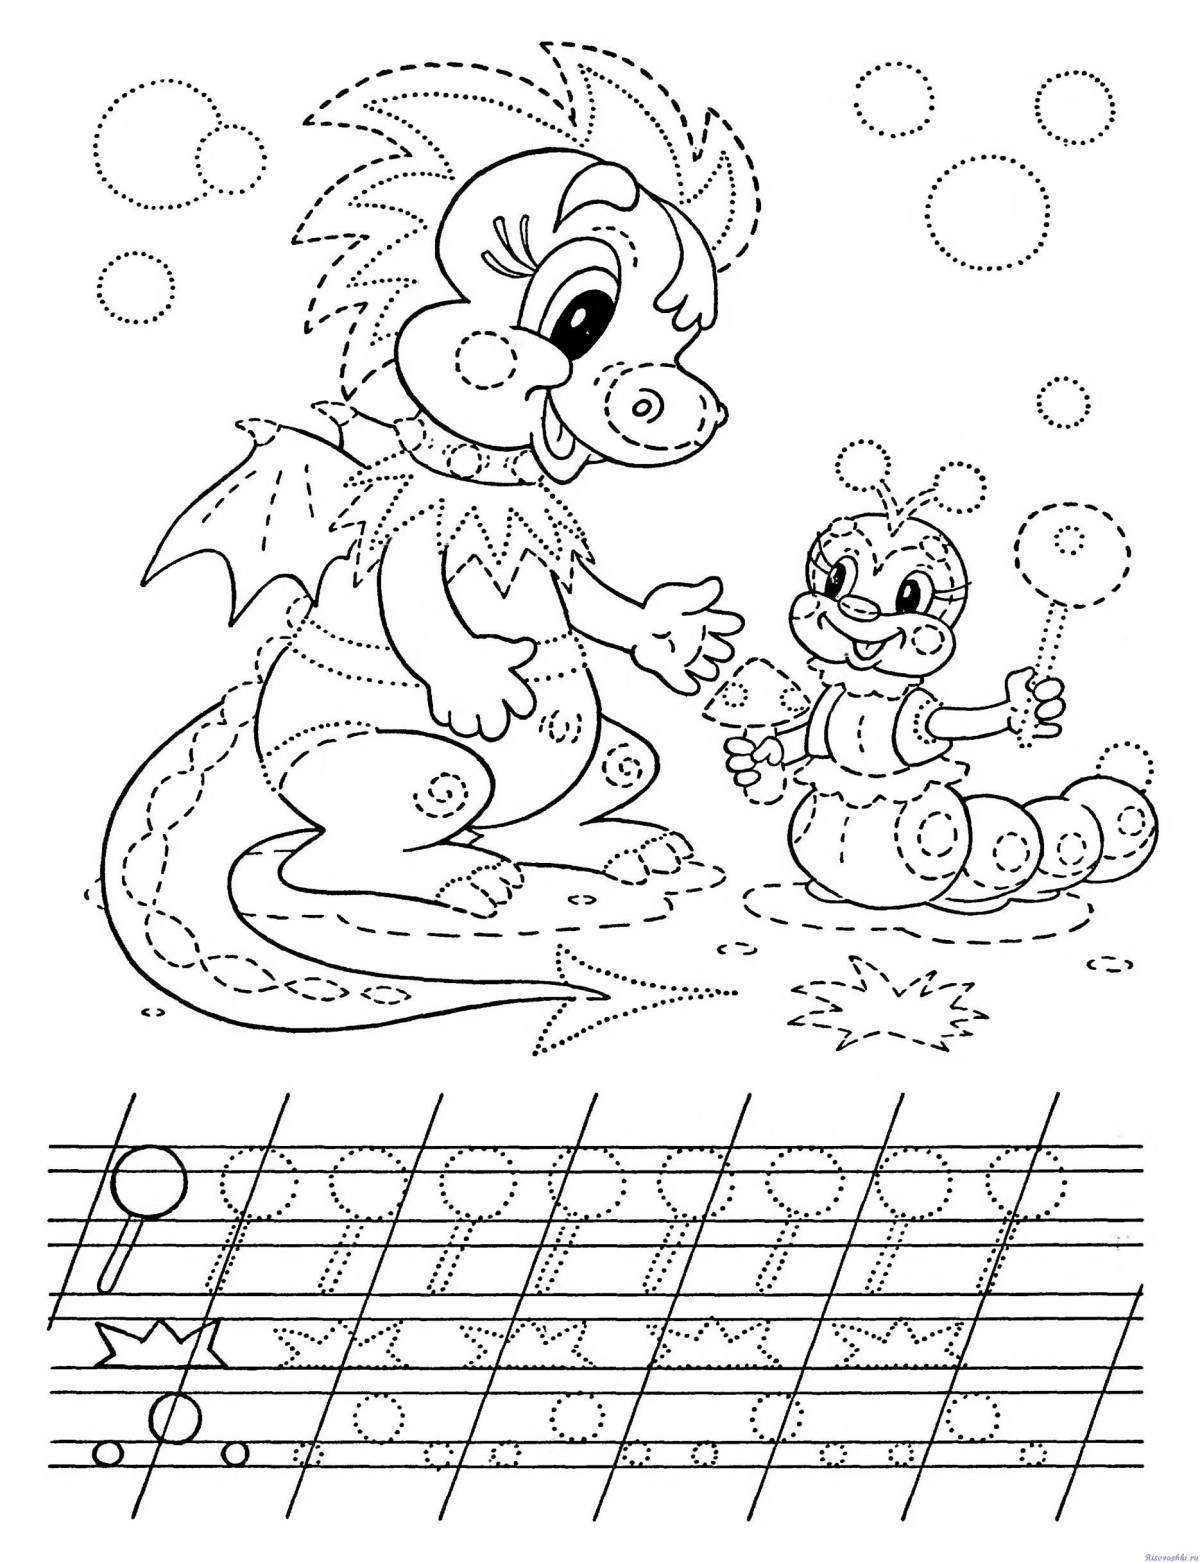 Colourful educational coloring book for children 5-6 years old